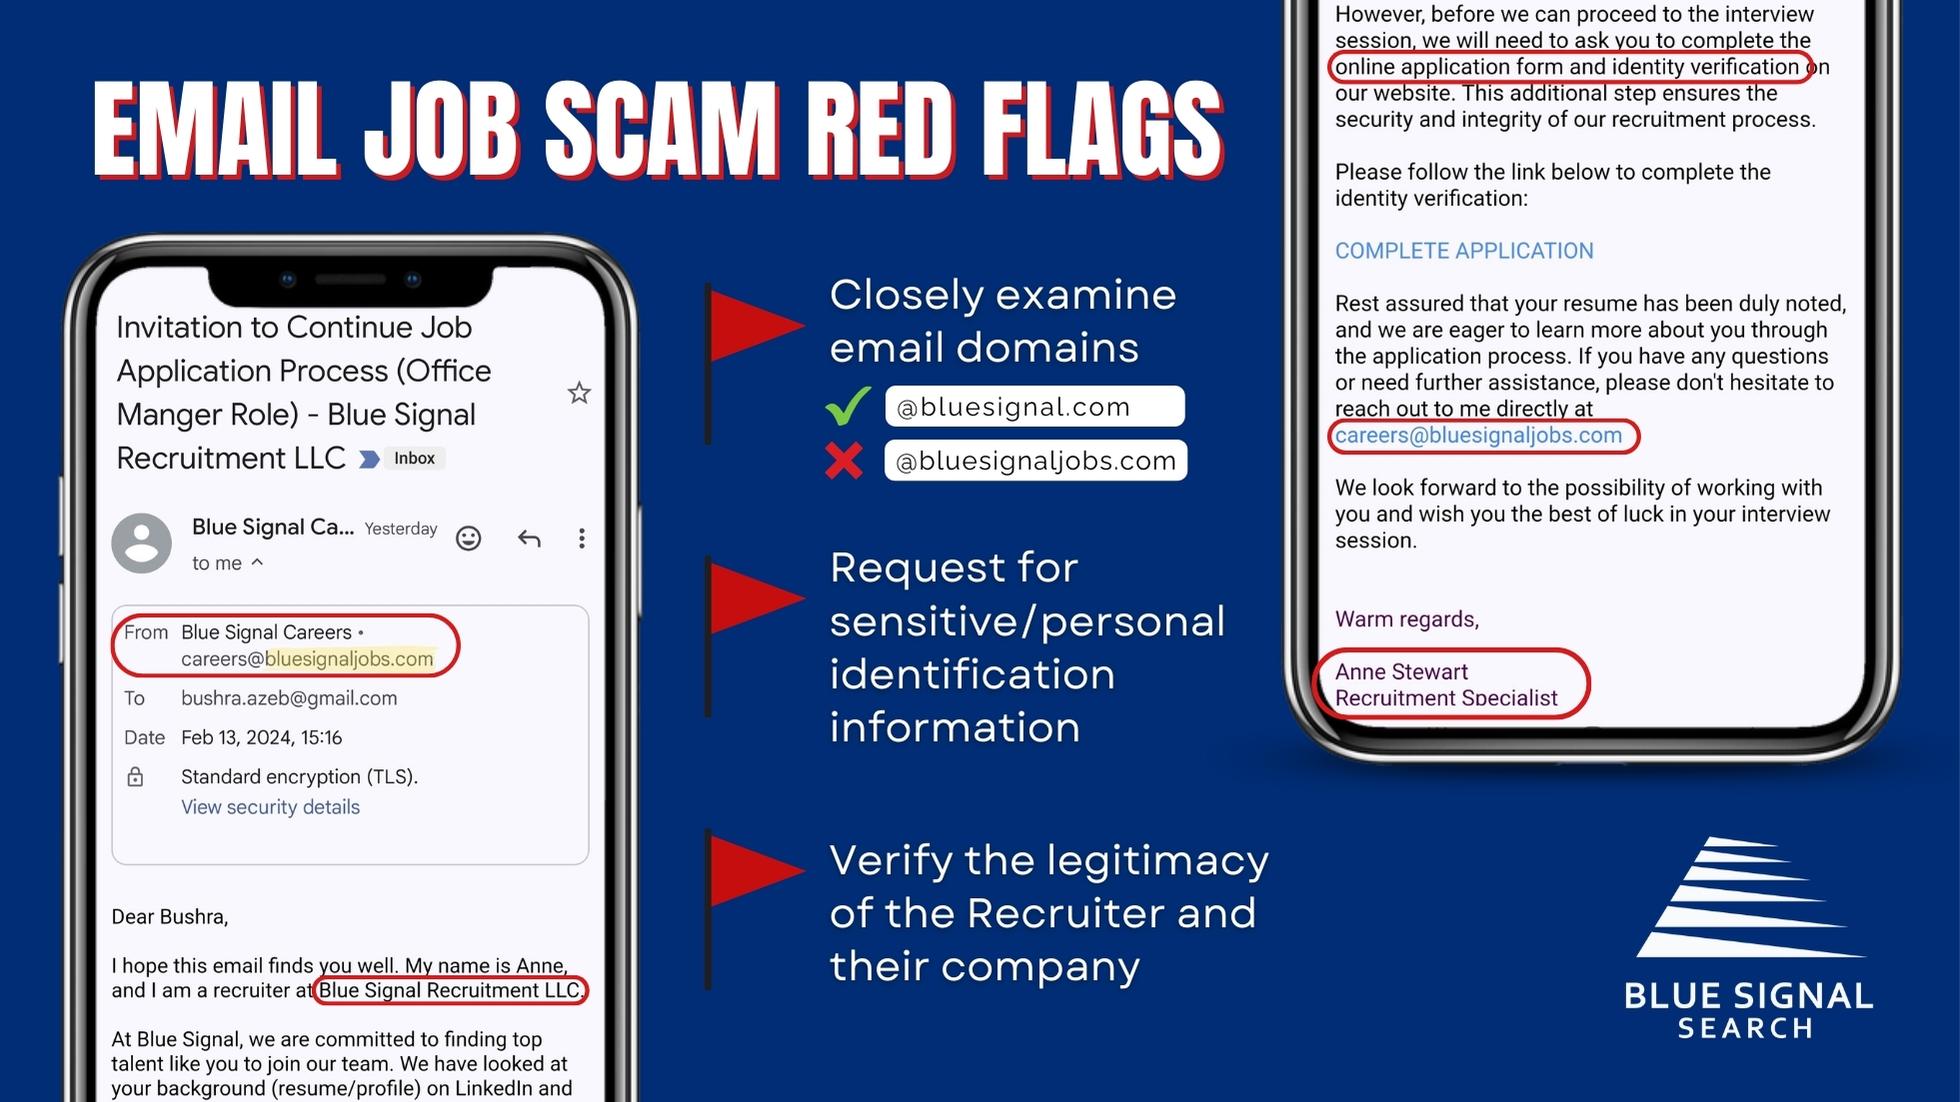 A smartphone showing an email with suspicious red flags, such as mismatched email domains, indicating a job scam.